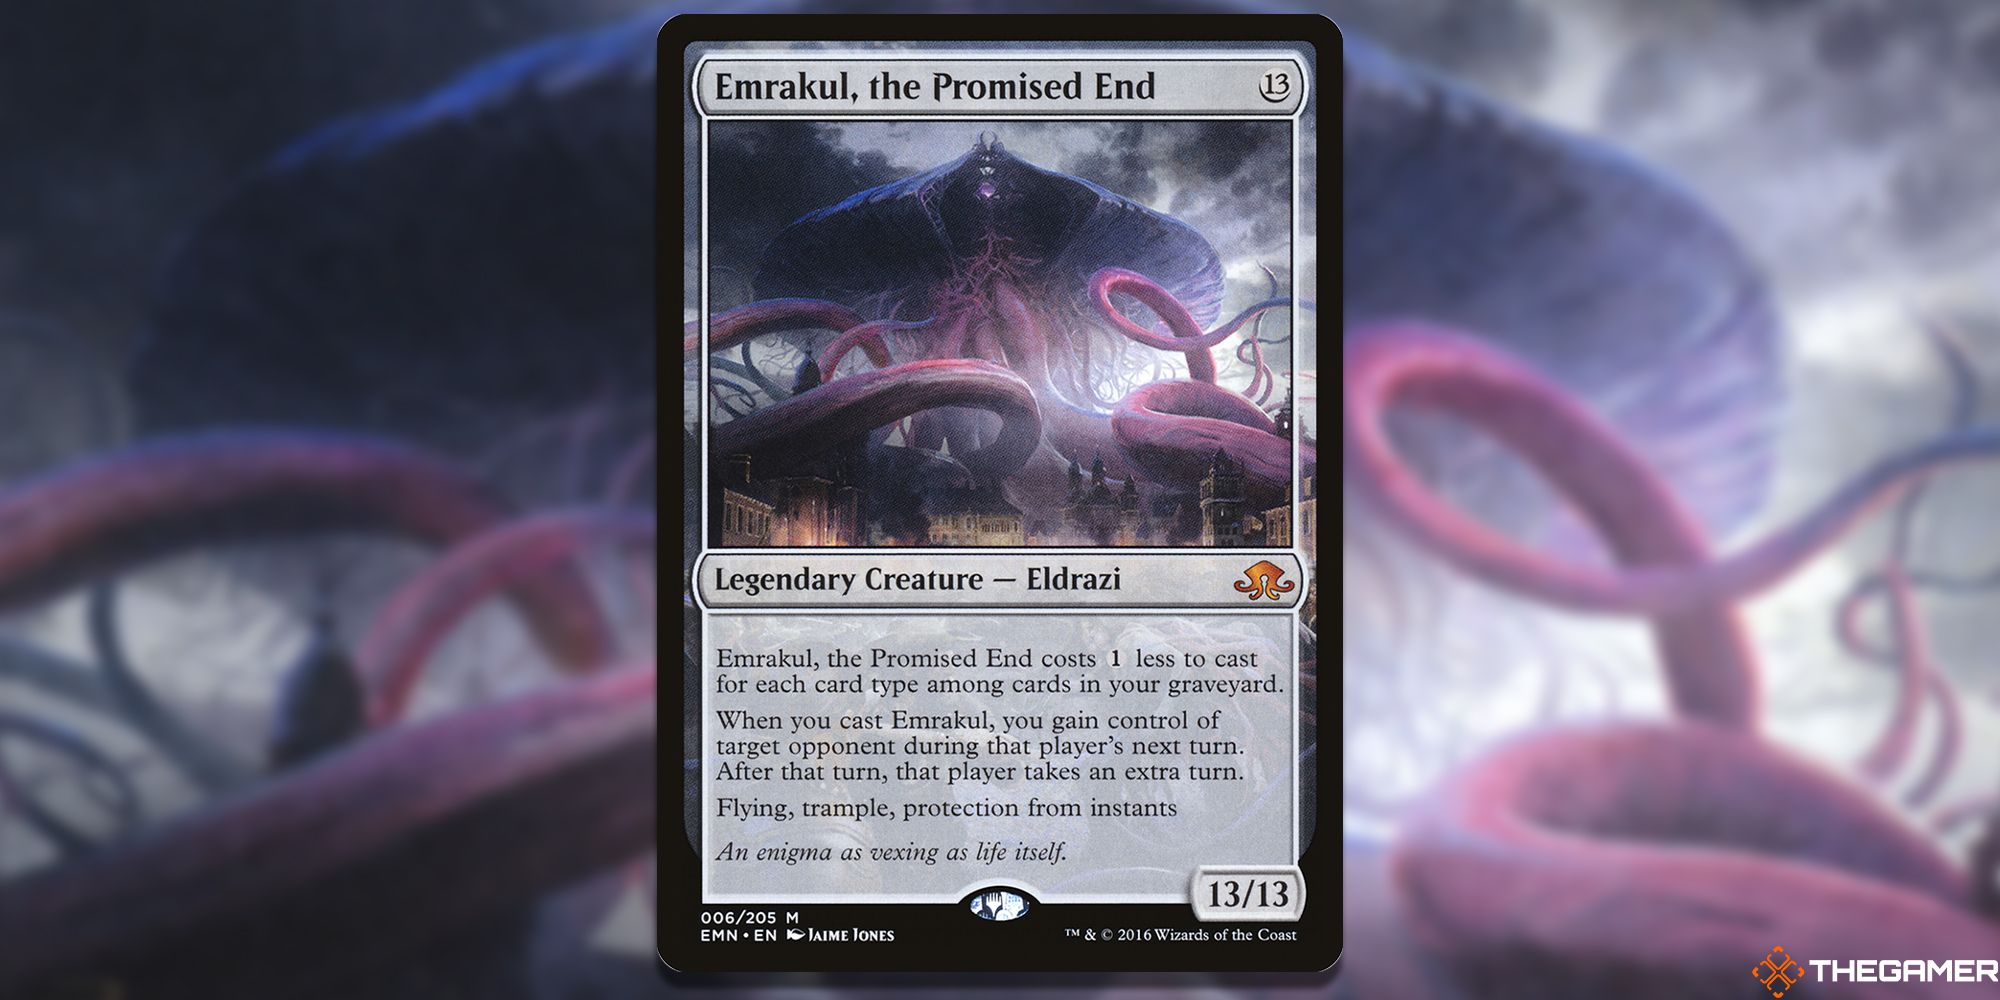 Image of the Emrakul, The Promised End card in Magic: The Gathering, with art by Jaime Jones